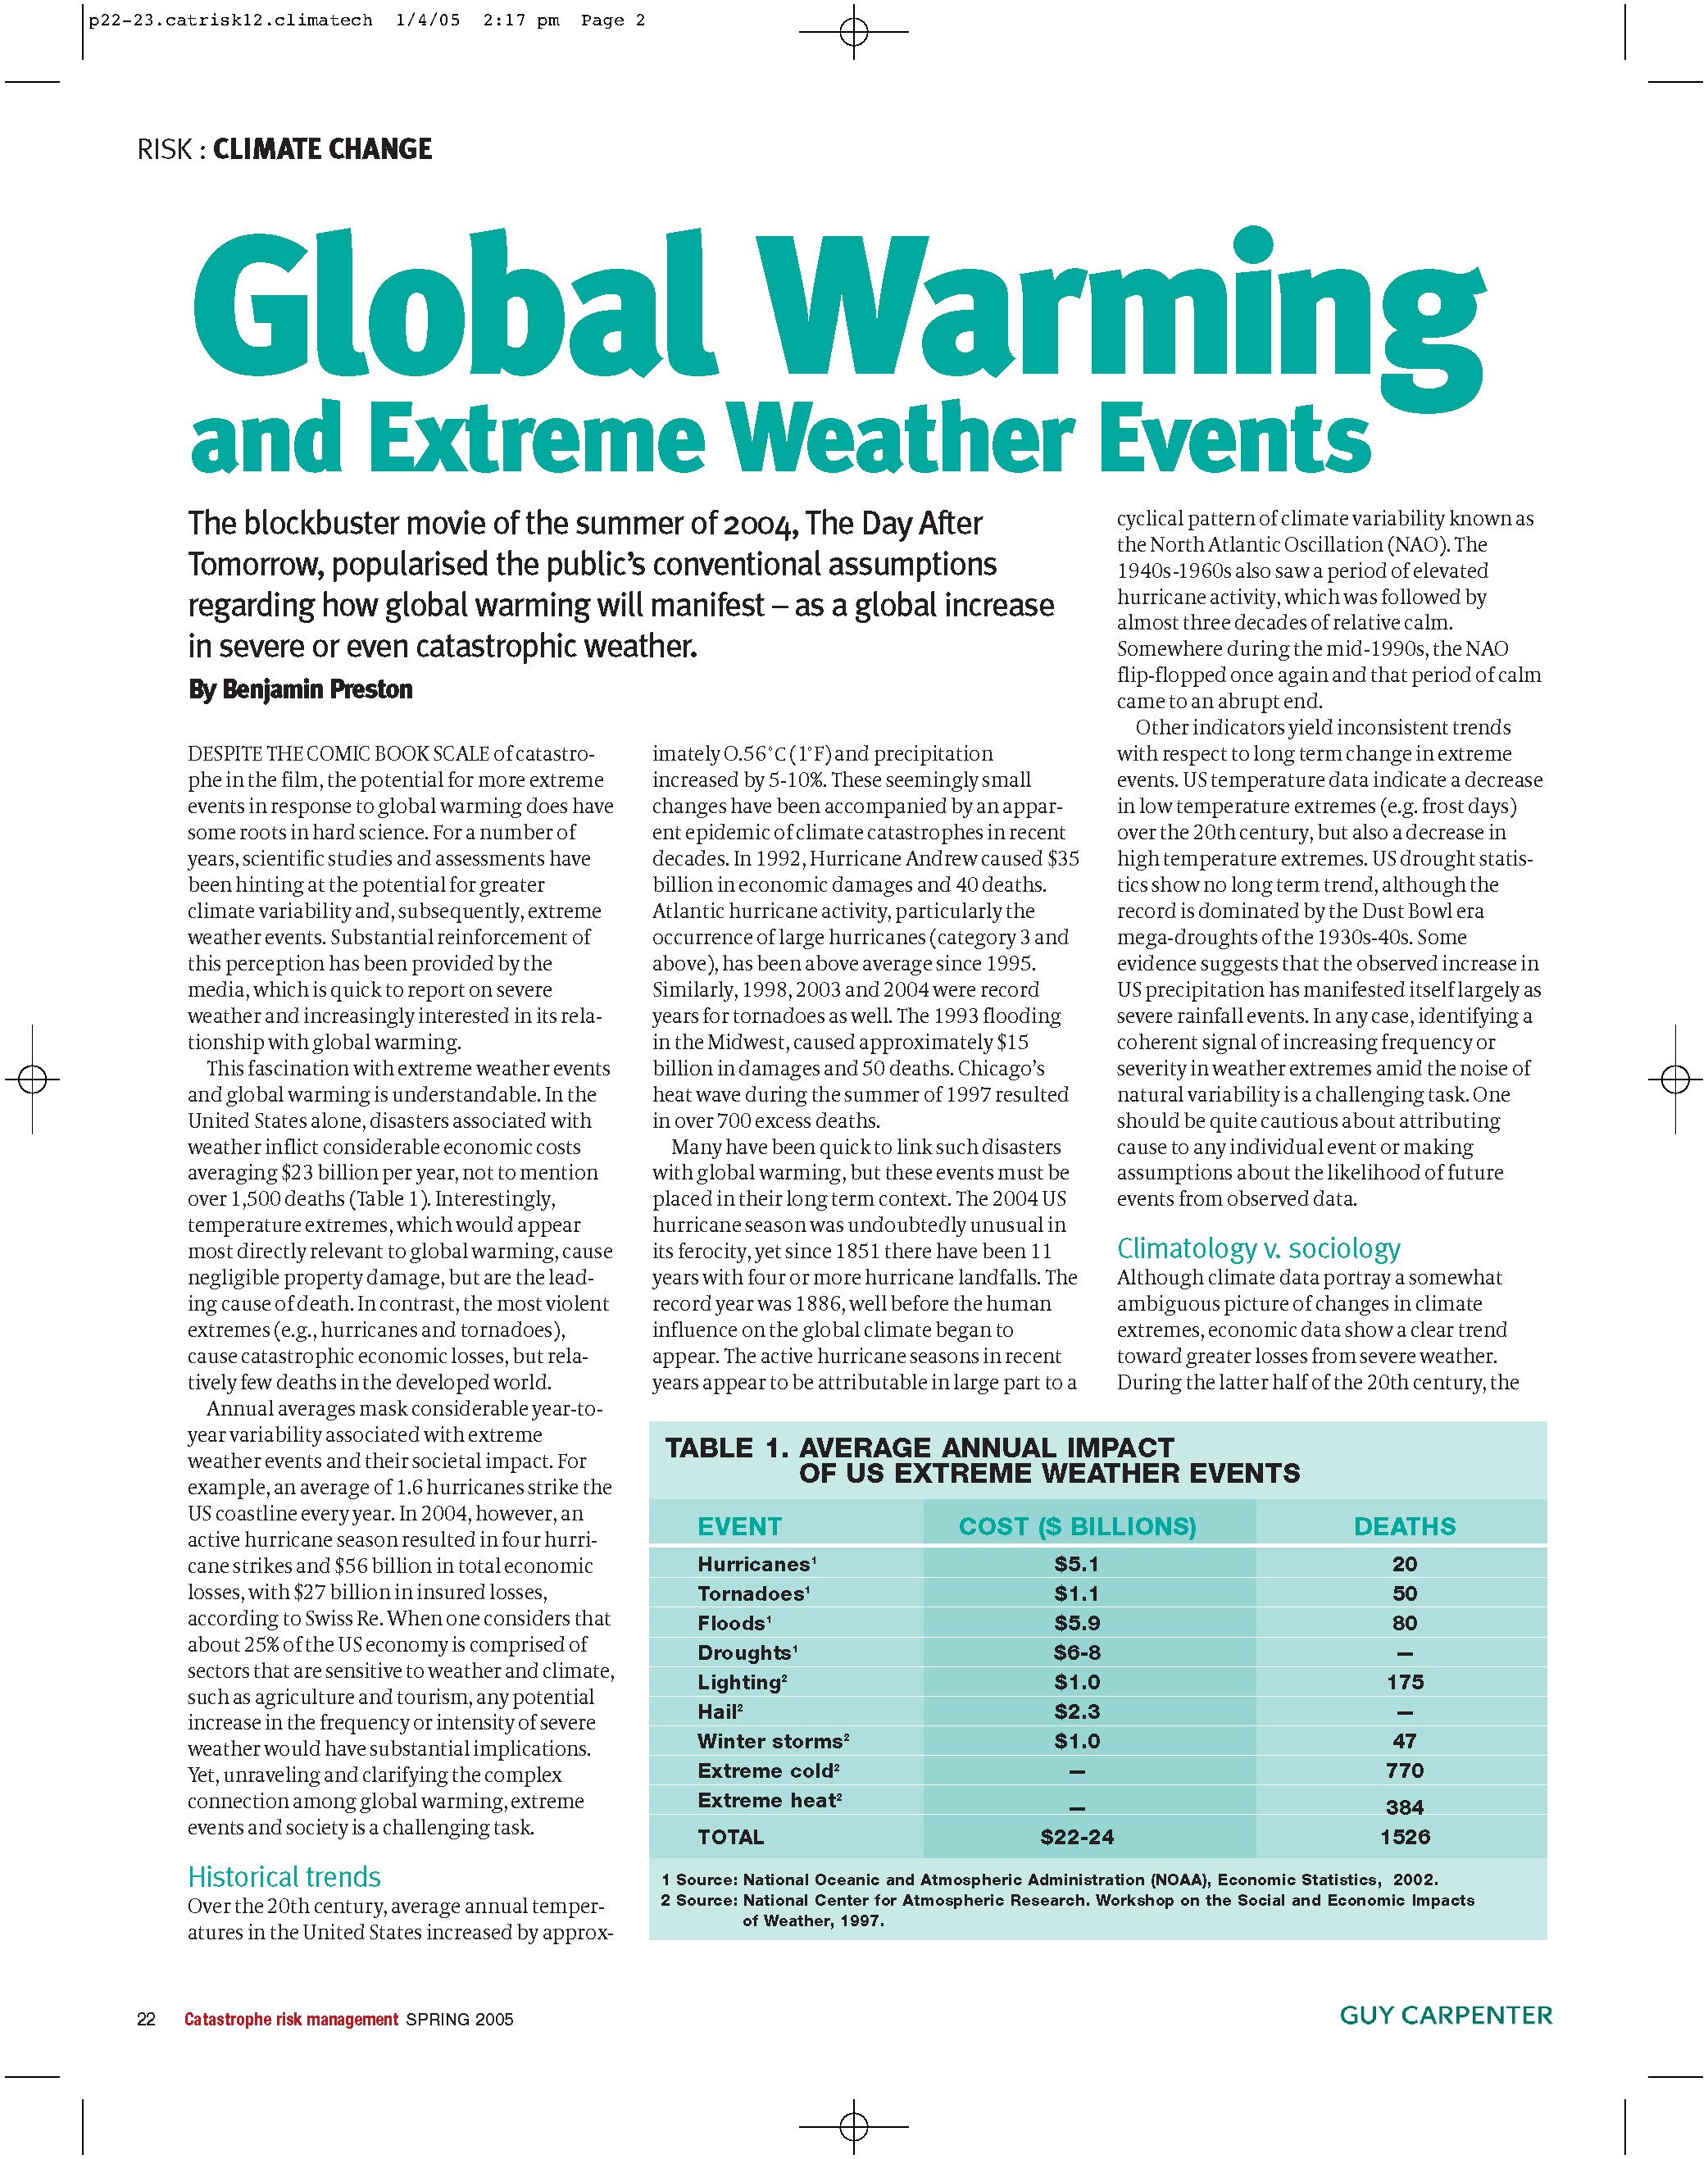 research article on global warming